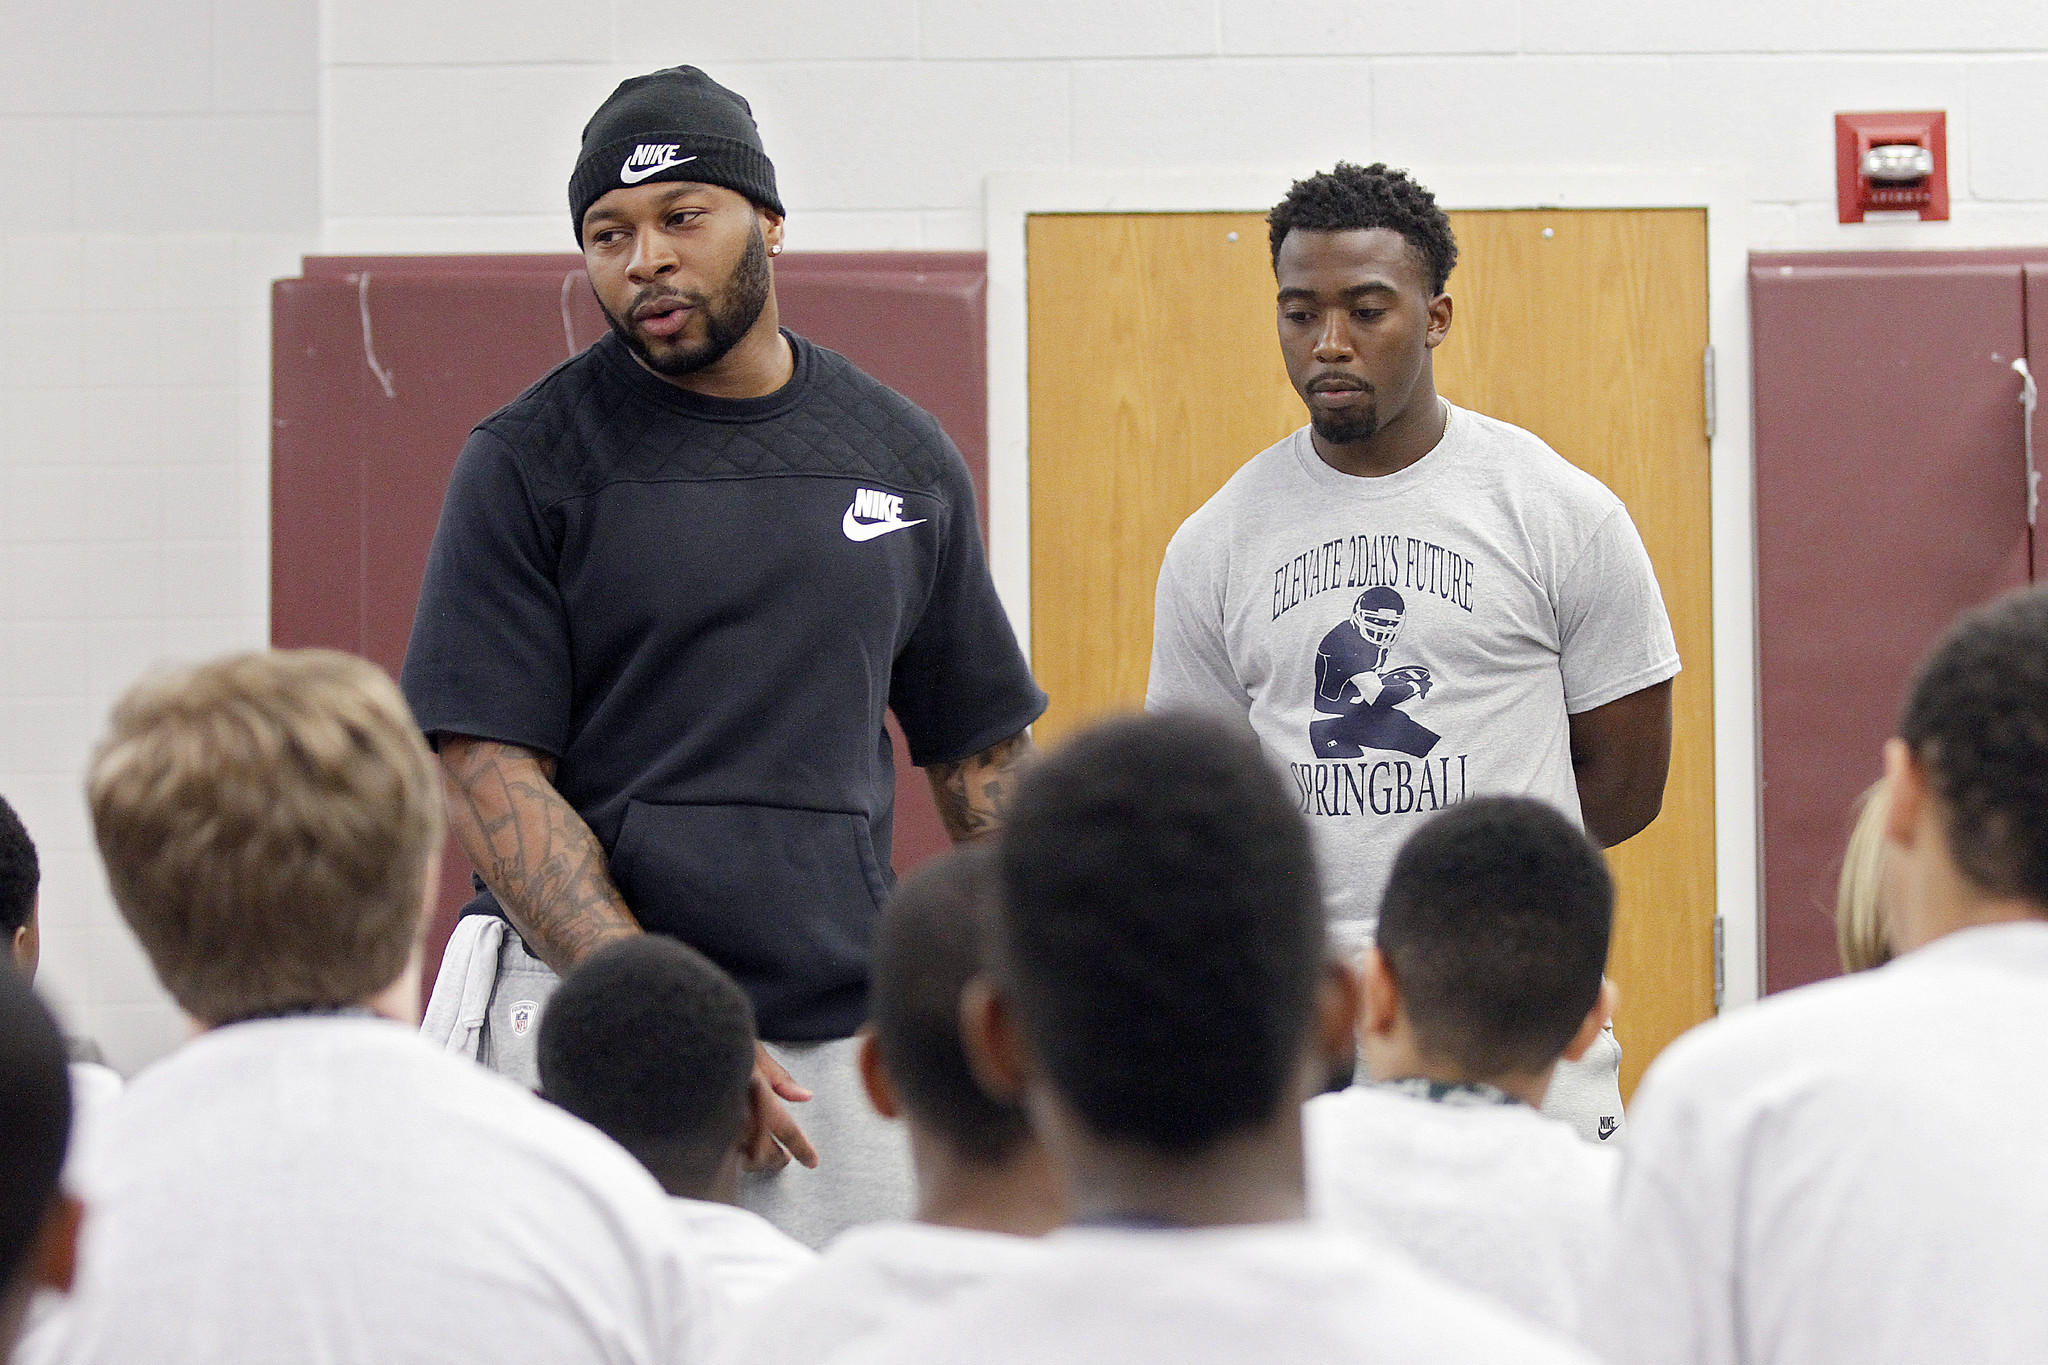 Tyrod Taylor talks to young people about football, life - Daily Press2048 x 1365